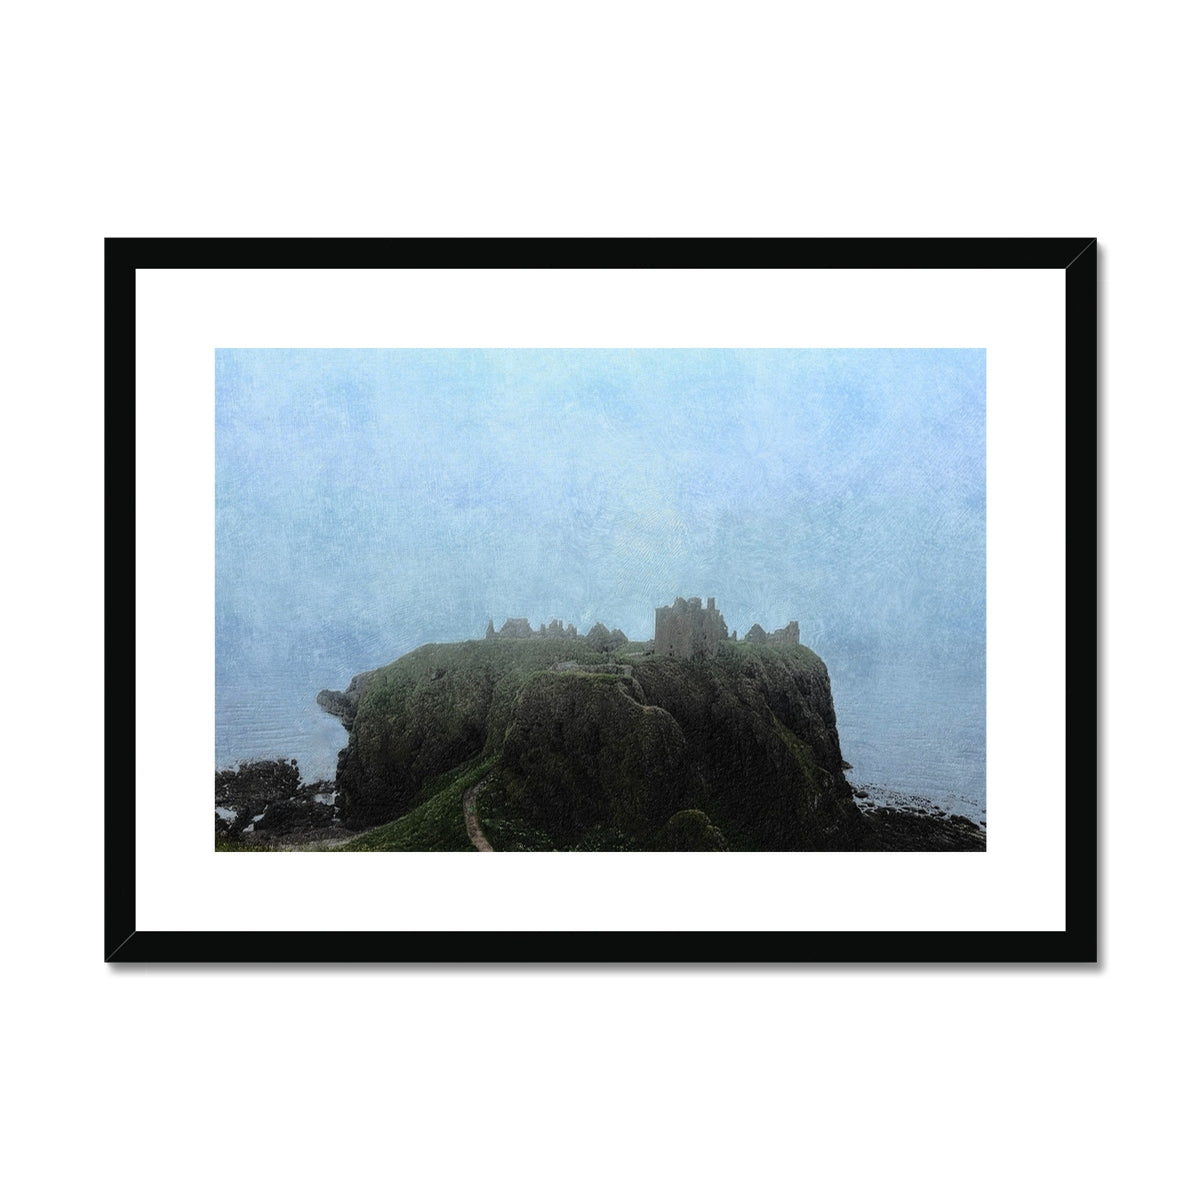 Dunnottar Castle Mist Painting | Framed & Mounted Prints From Scotland-Framed & Mounted Prints-Historic & Iconic Scotland Art Gallery-A2 Landscape-Black Frame-Paintings, Prints, Homeware, Art Gifts From Scotland By Scottish Artist Kevin Hunter